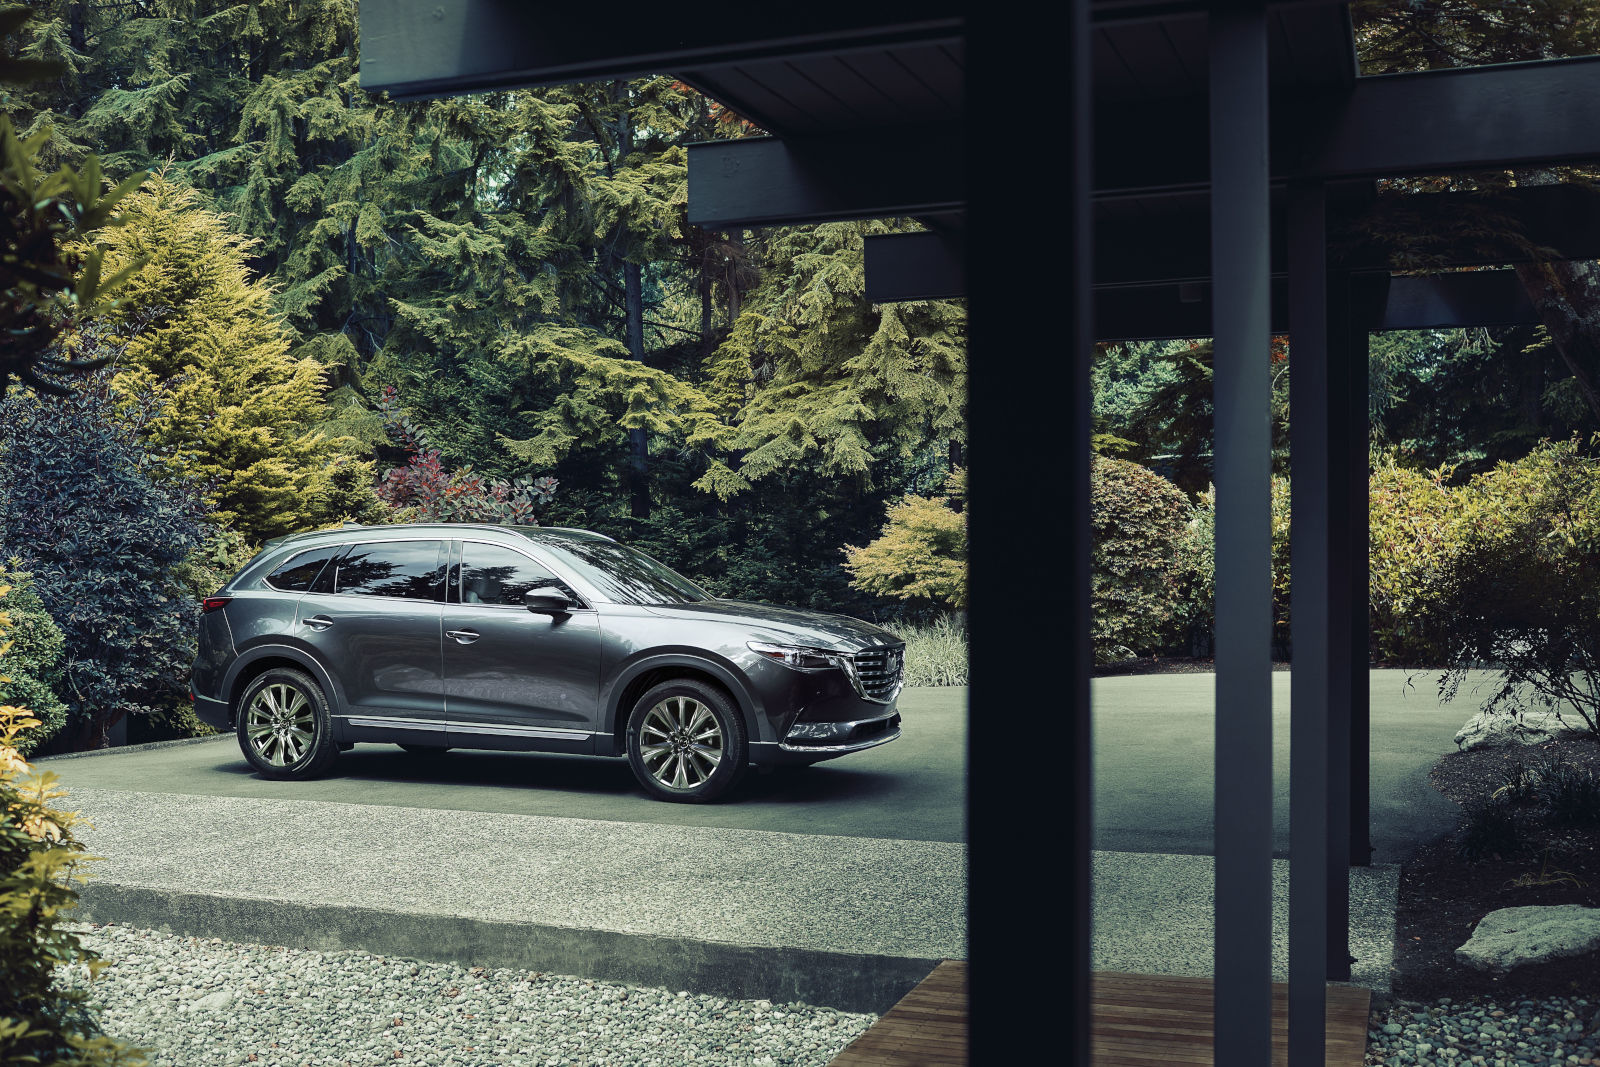 Why You Should Consider the 2023 Mazda CX-9